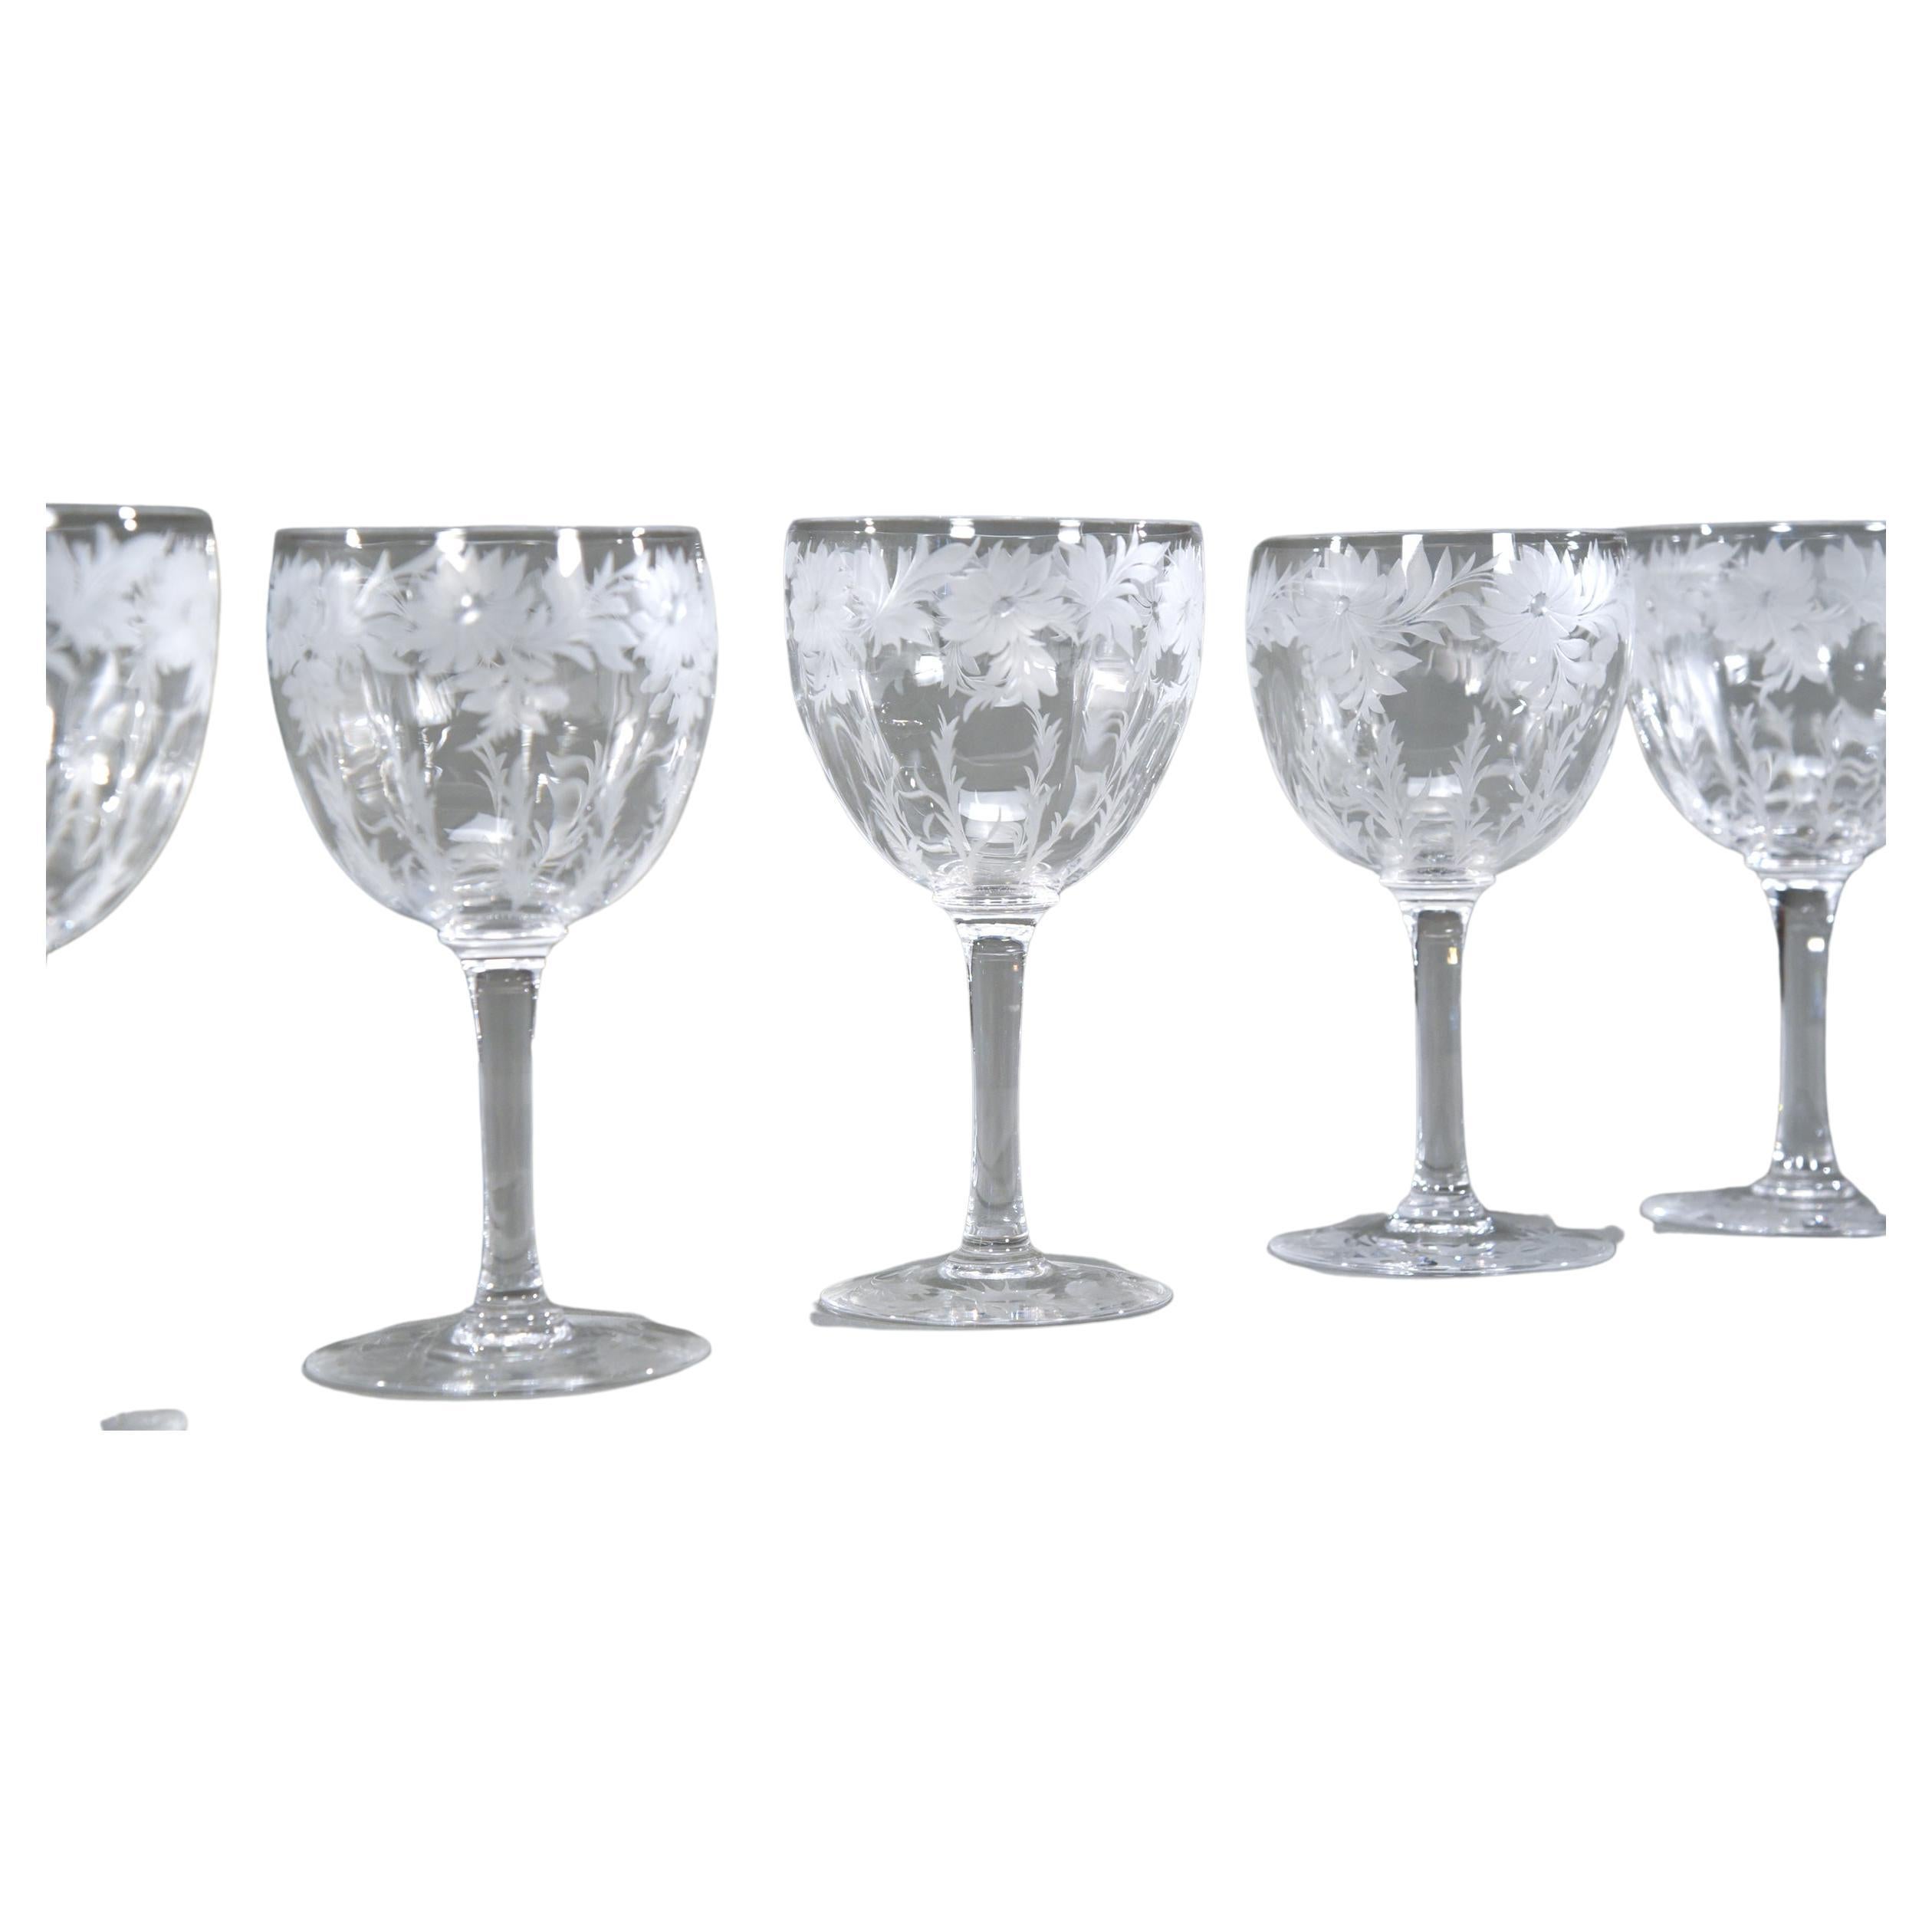 What is a glass goblet used for?